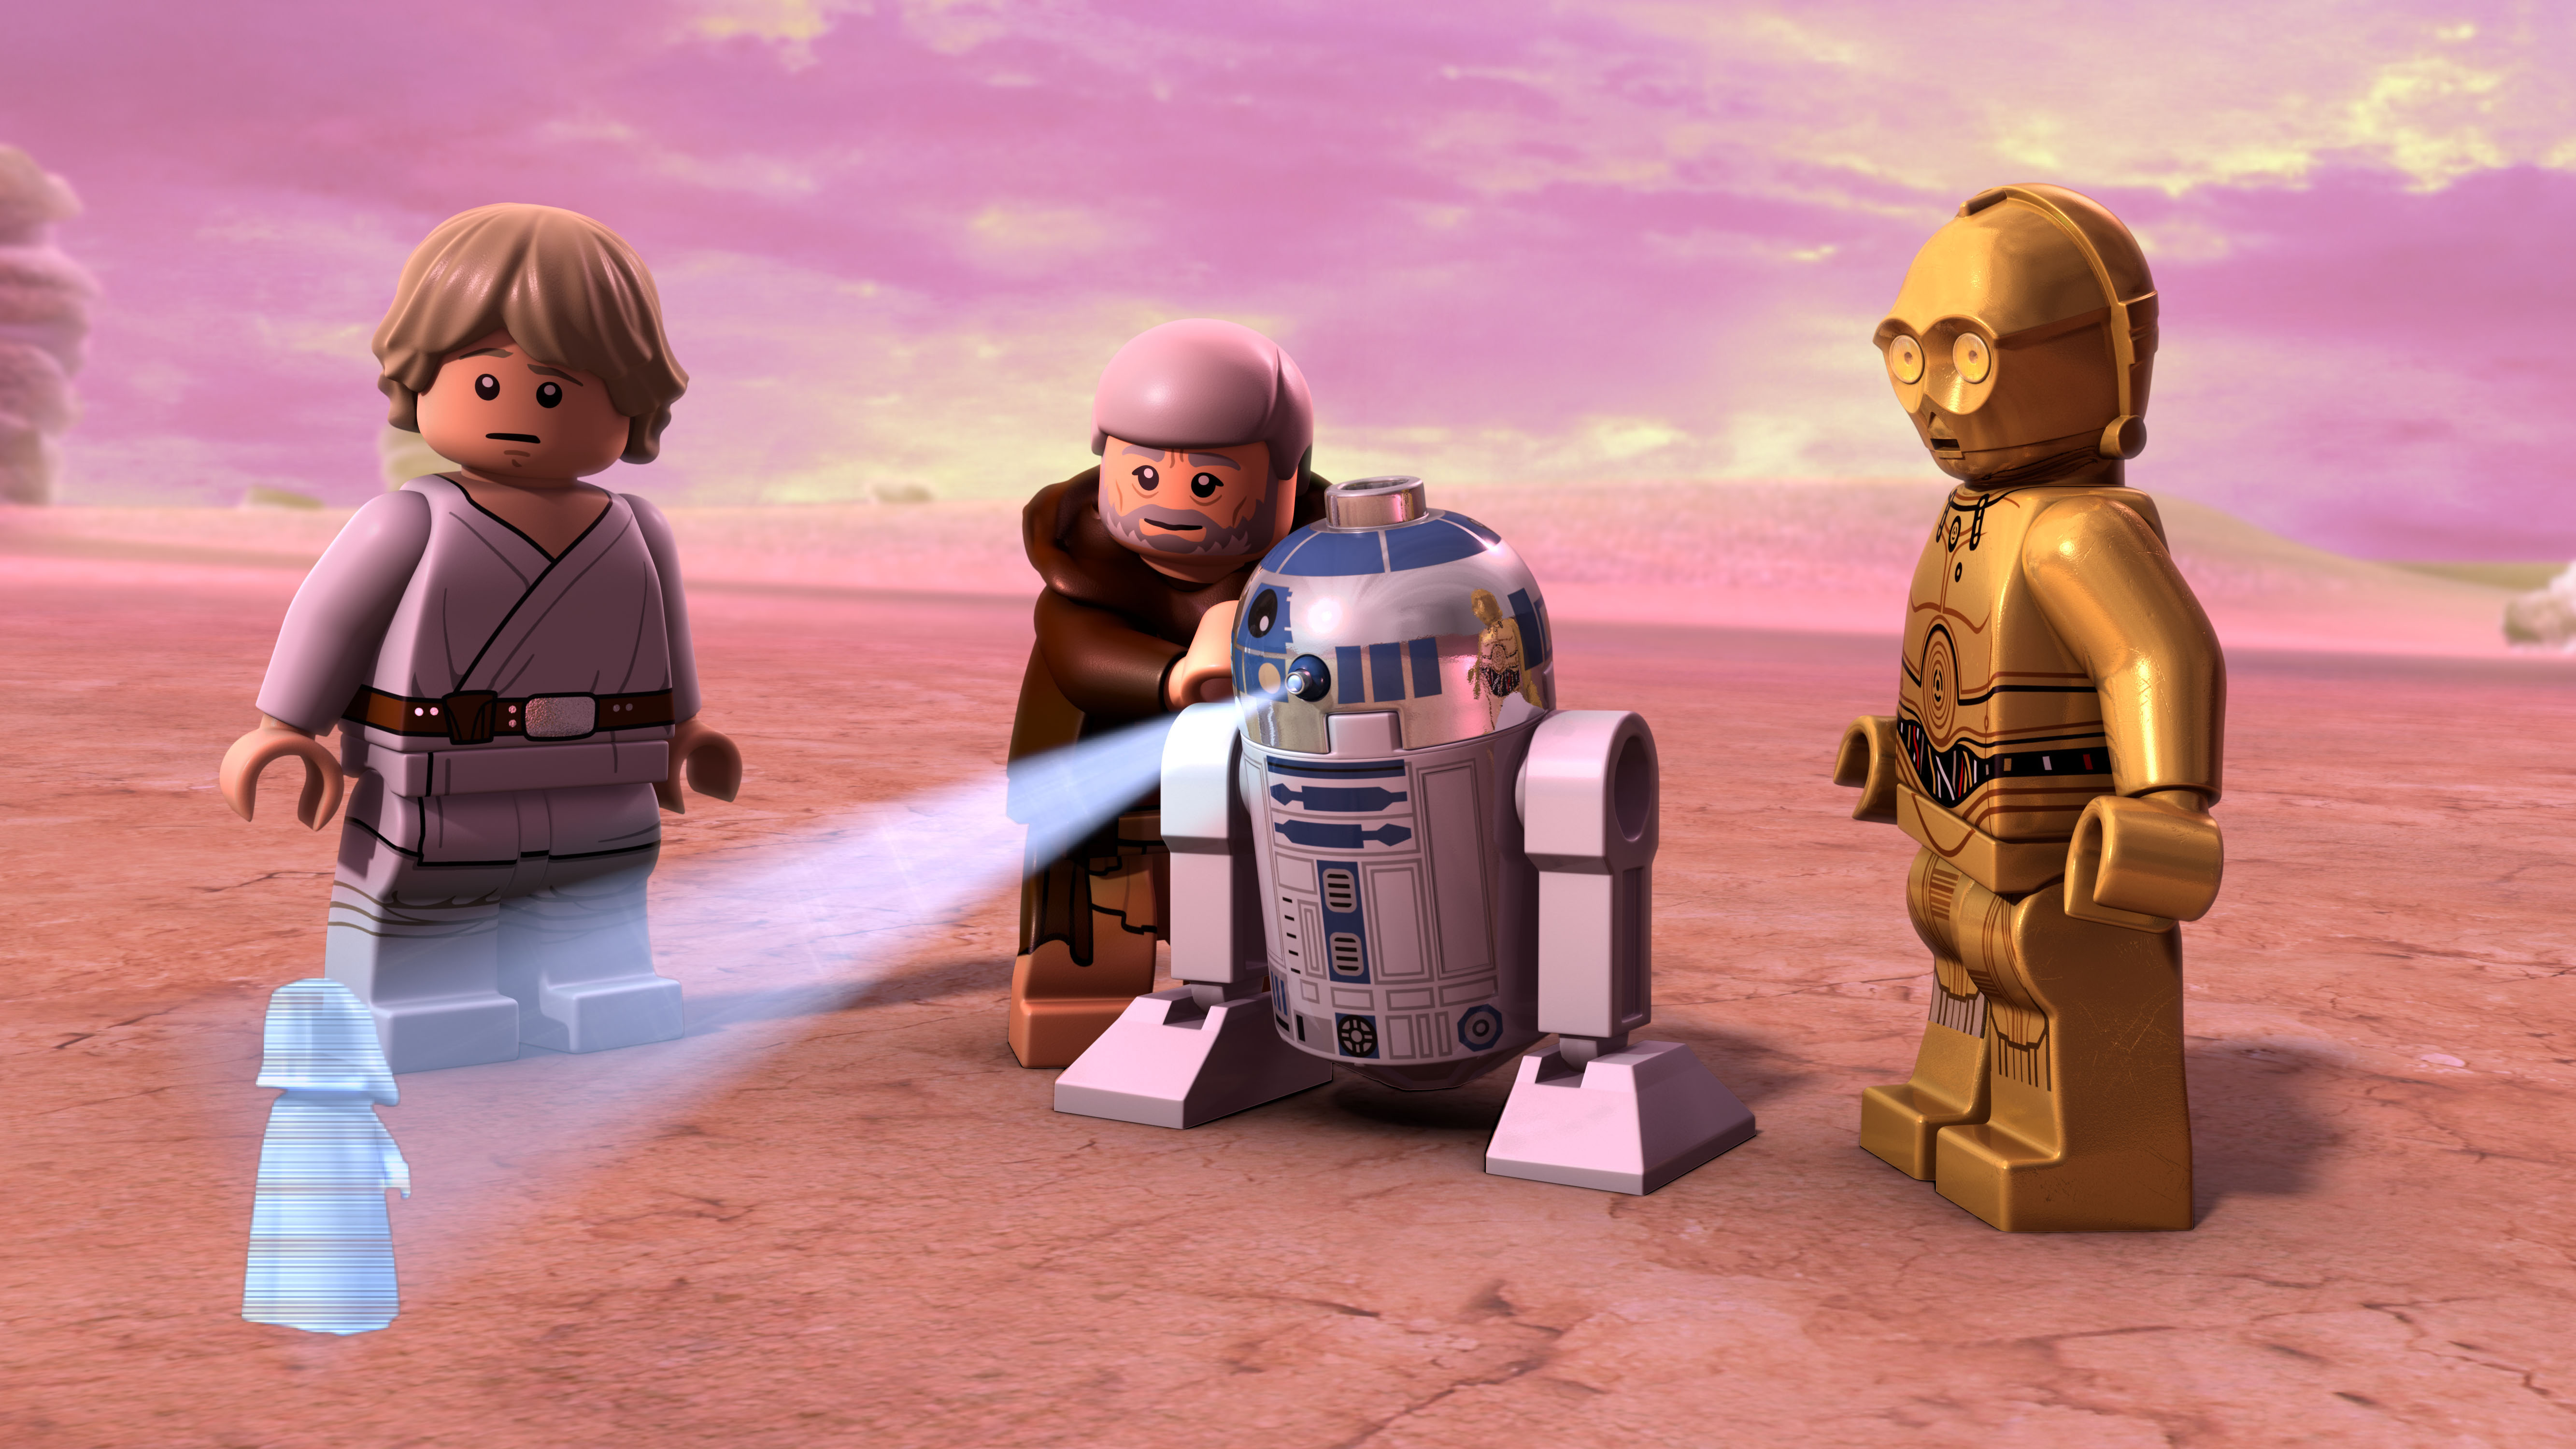 Lego Star Wars Droid Tales Promo Poster NEW C-3PO R2 D2 11 x 17 Inches Disney